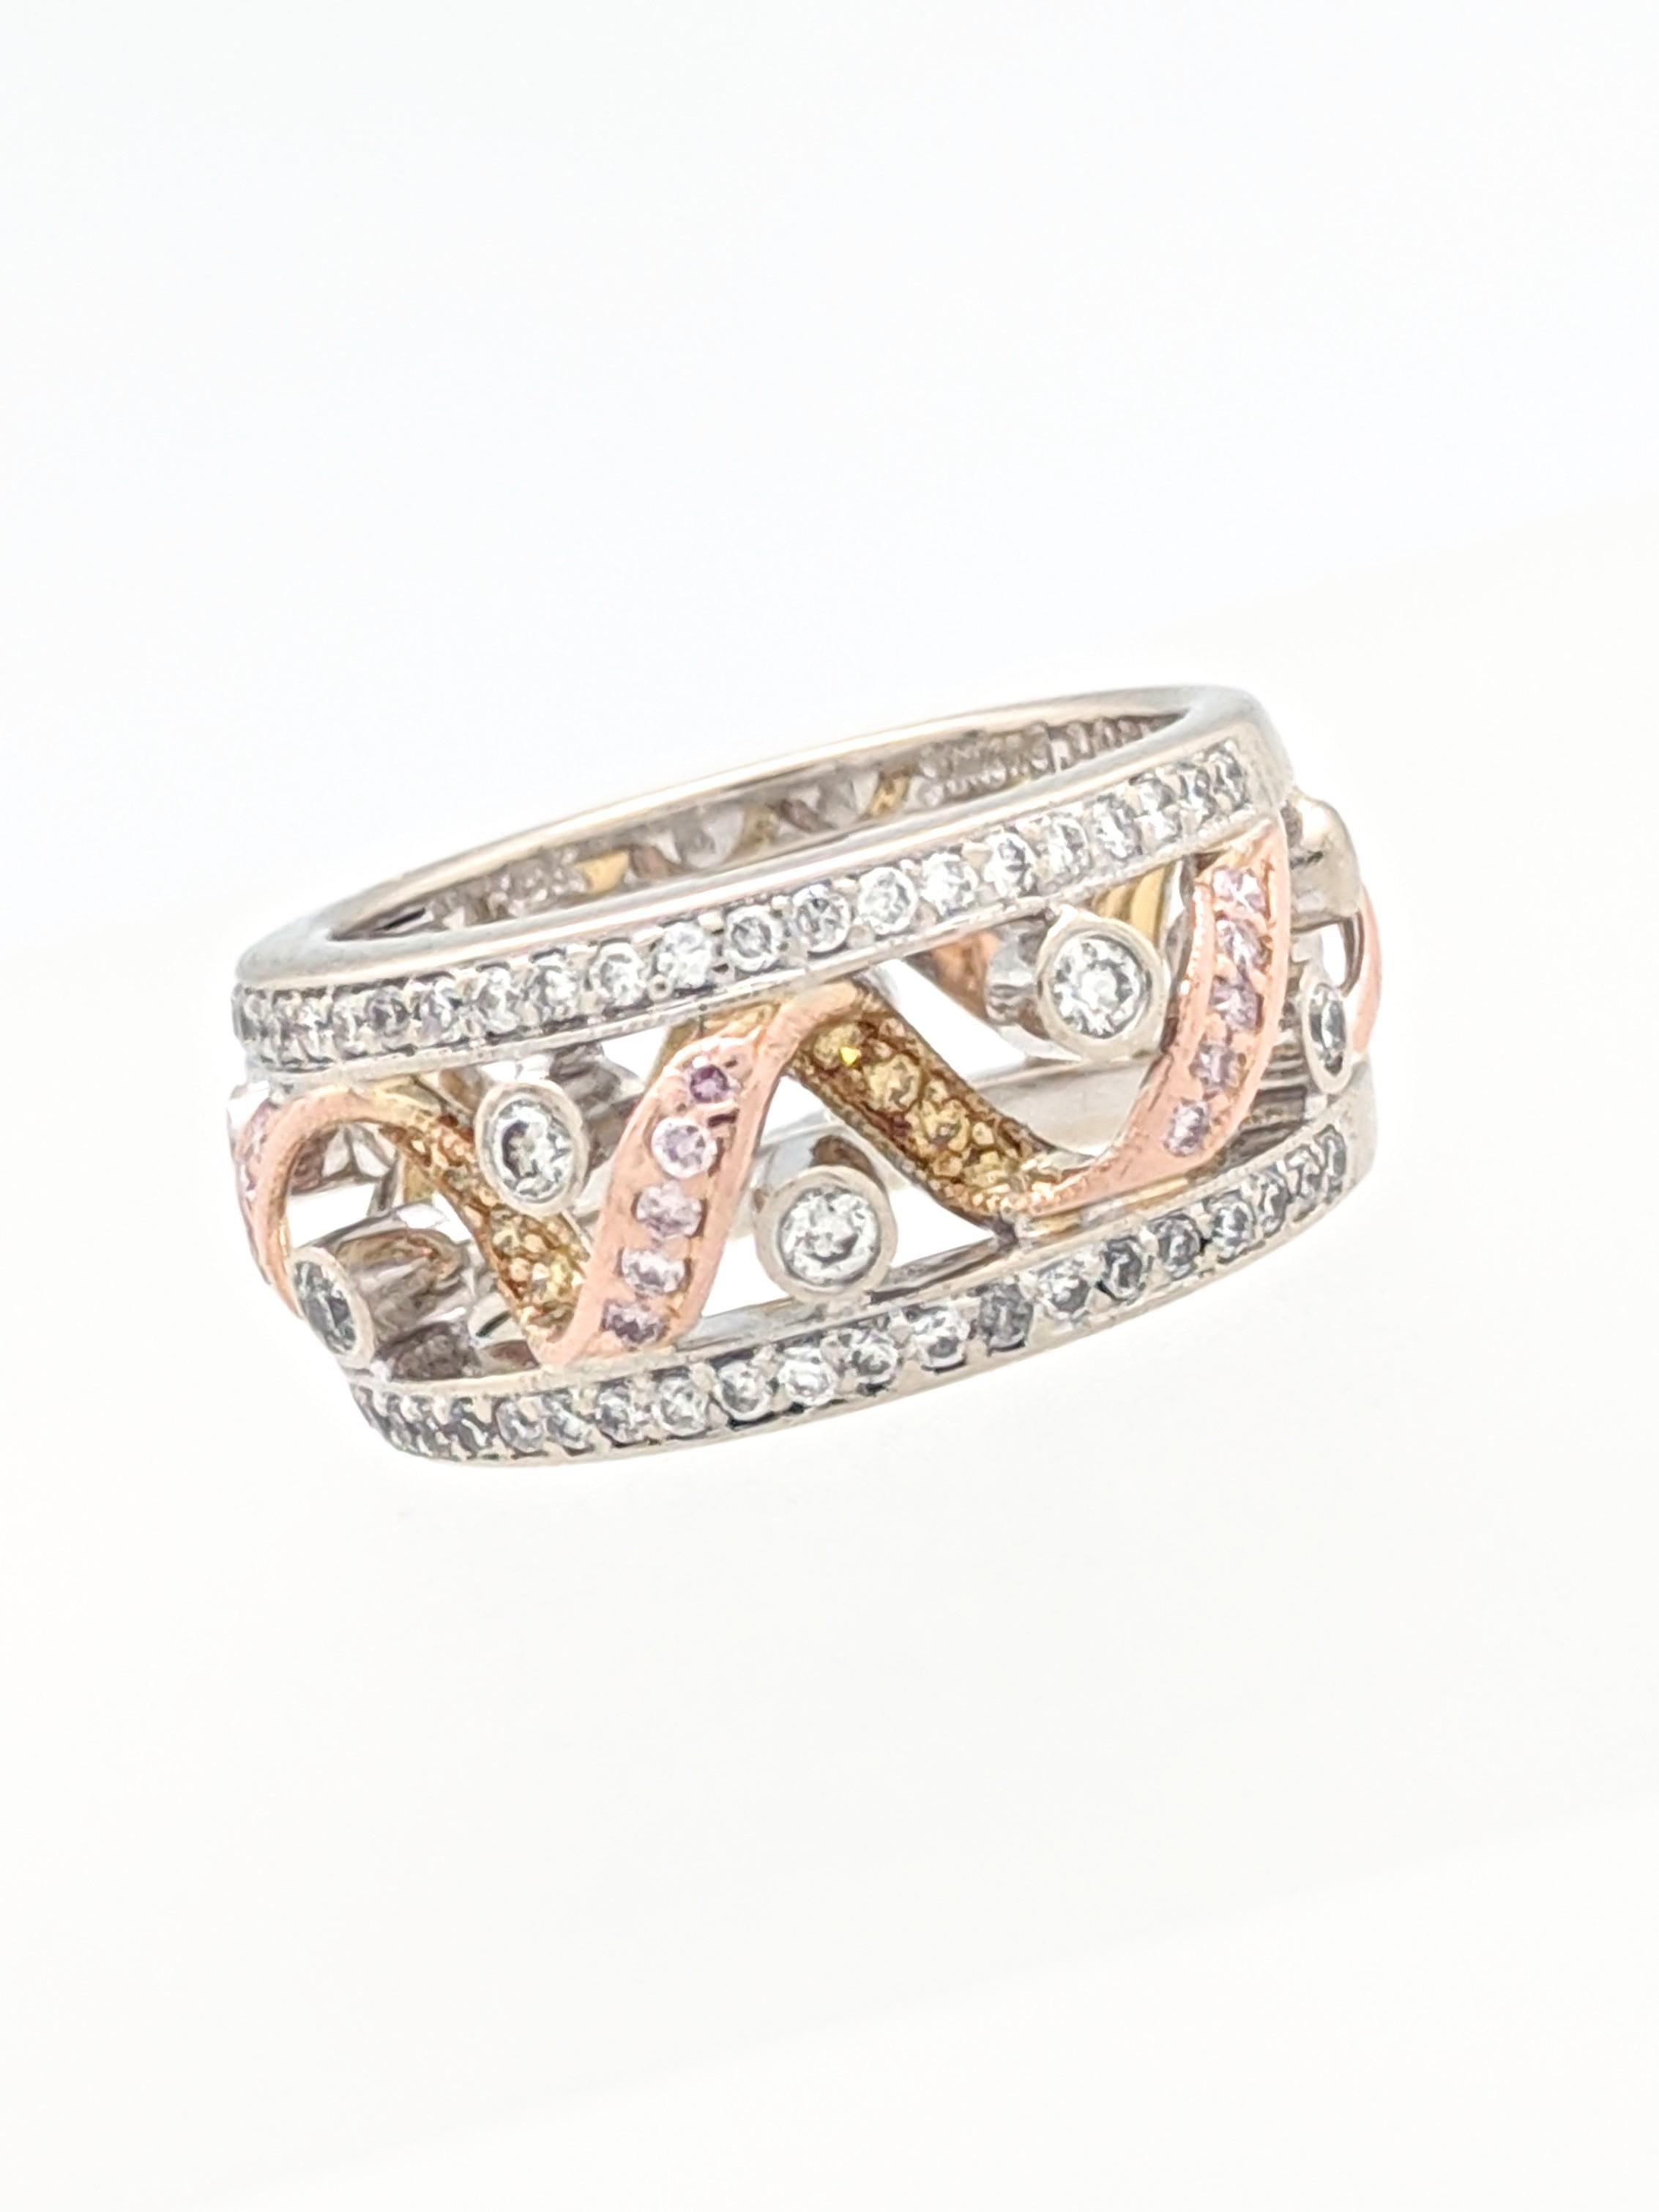 Simon G. LP1697 Ladies Tri-color Diamond Wedding Band

You are viewing a Beautiful Simon G Ladies Tri-Color Wedding Band with Diamonds.

The band is crafted from 18k tri-gold and weighs 7.8 grams. It features 0.06tcw of yellow diamonds, 0.40tcw of